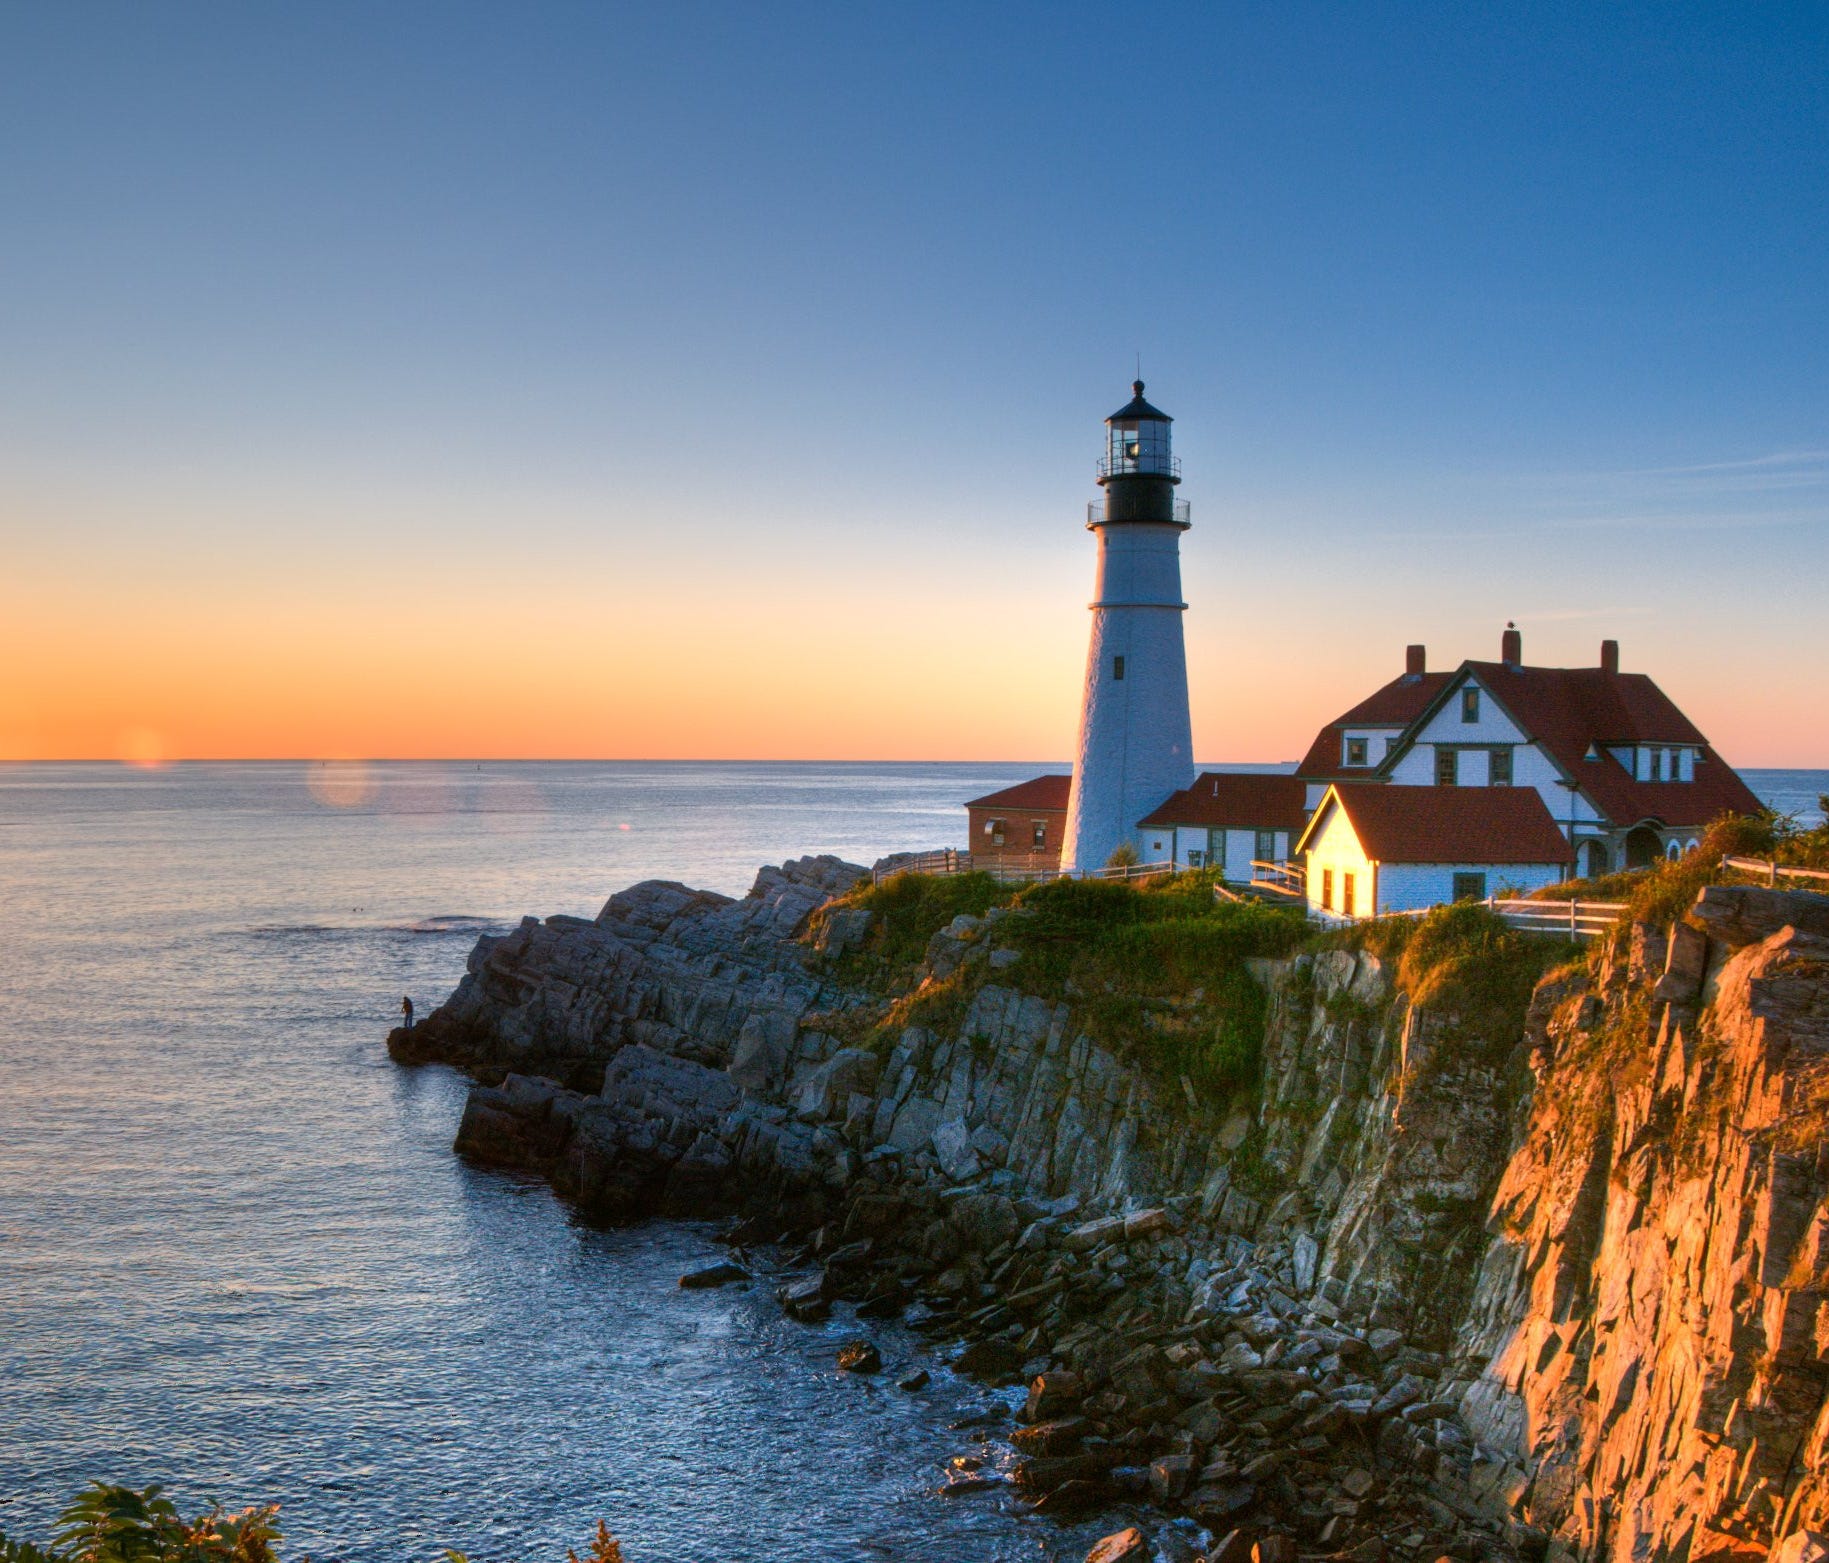 President George Washington had input in the construction of the Portland Head Lighthouse on Maine's coast, asking that it be built from local rubbelstone to save money.  The light first shown on January 10, 1791.